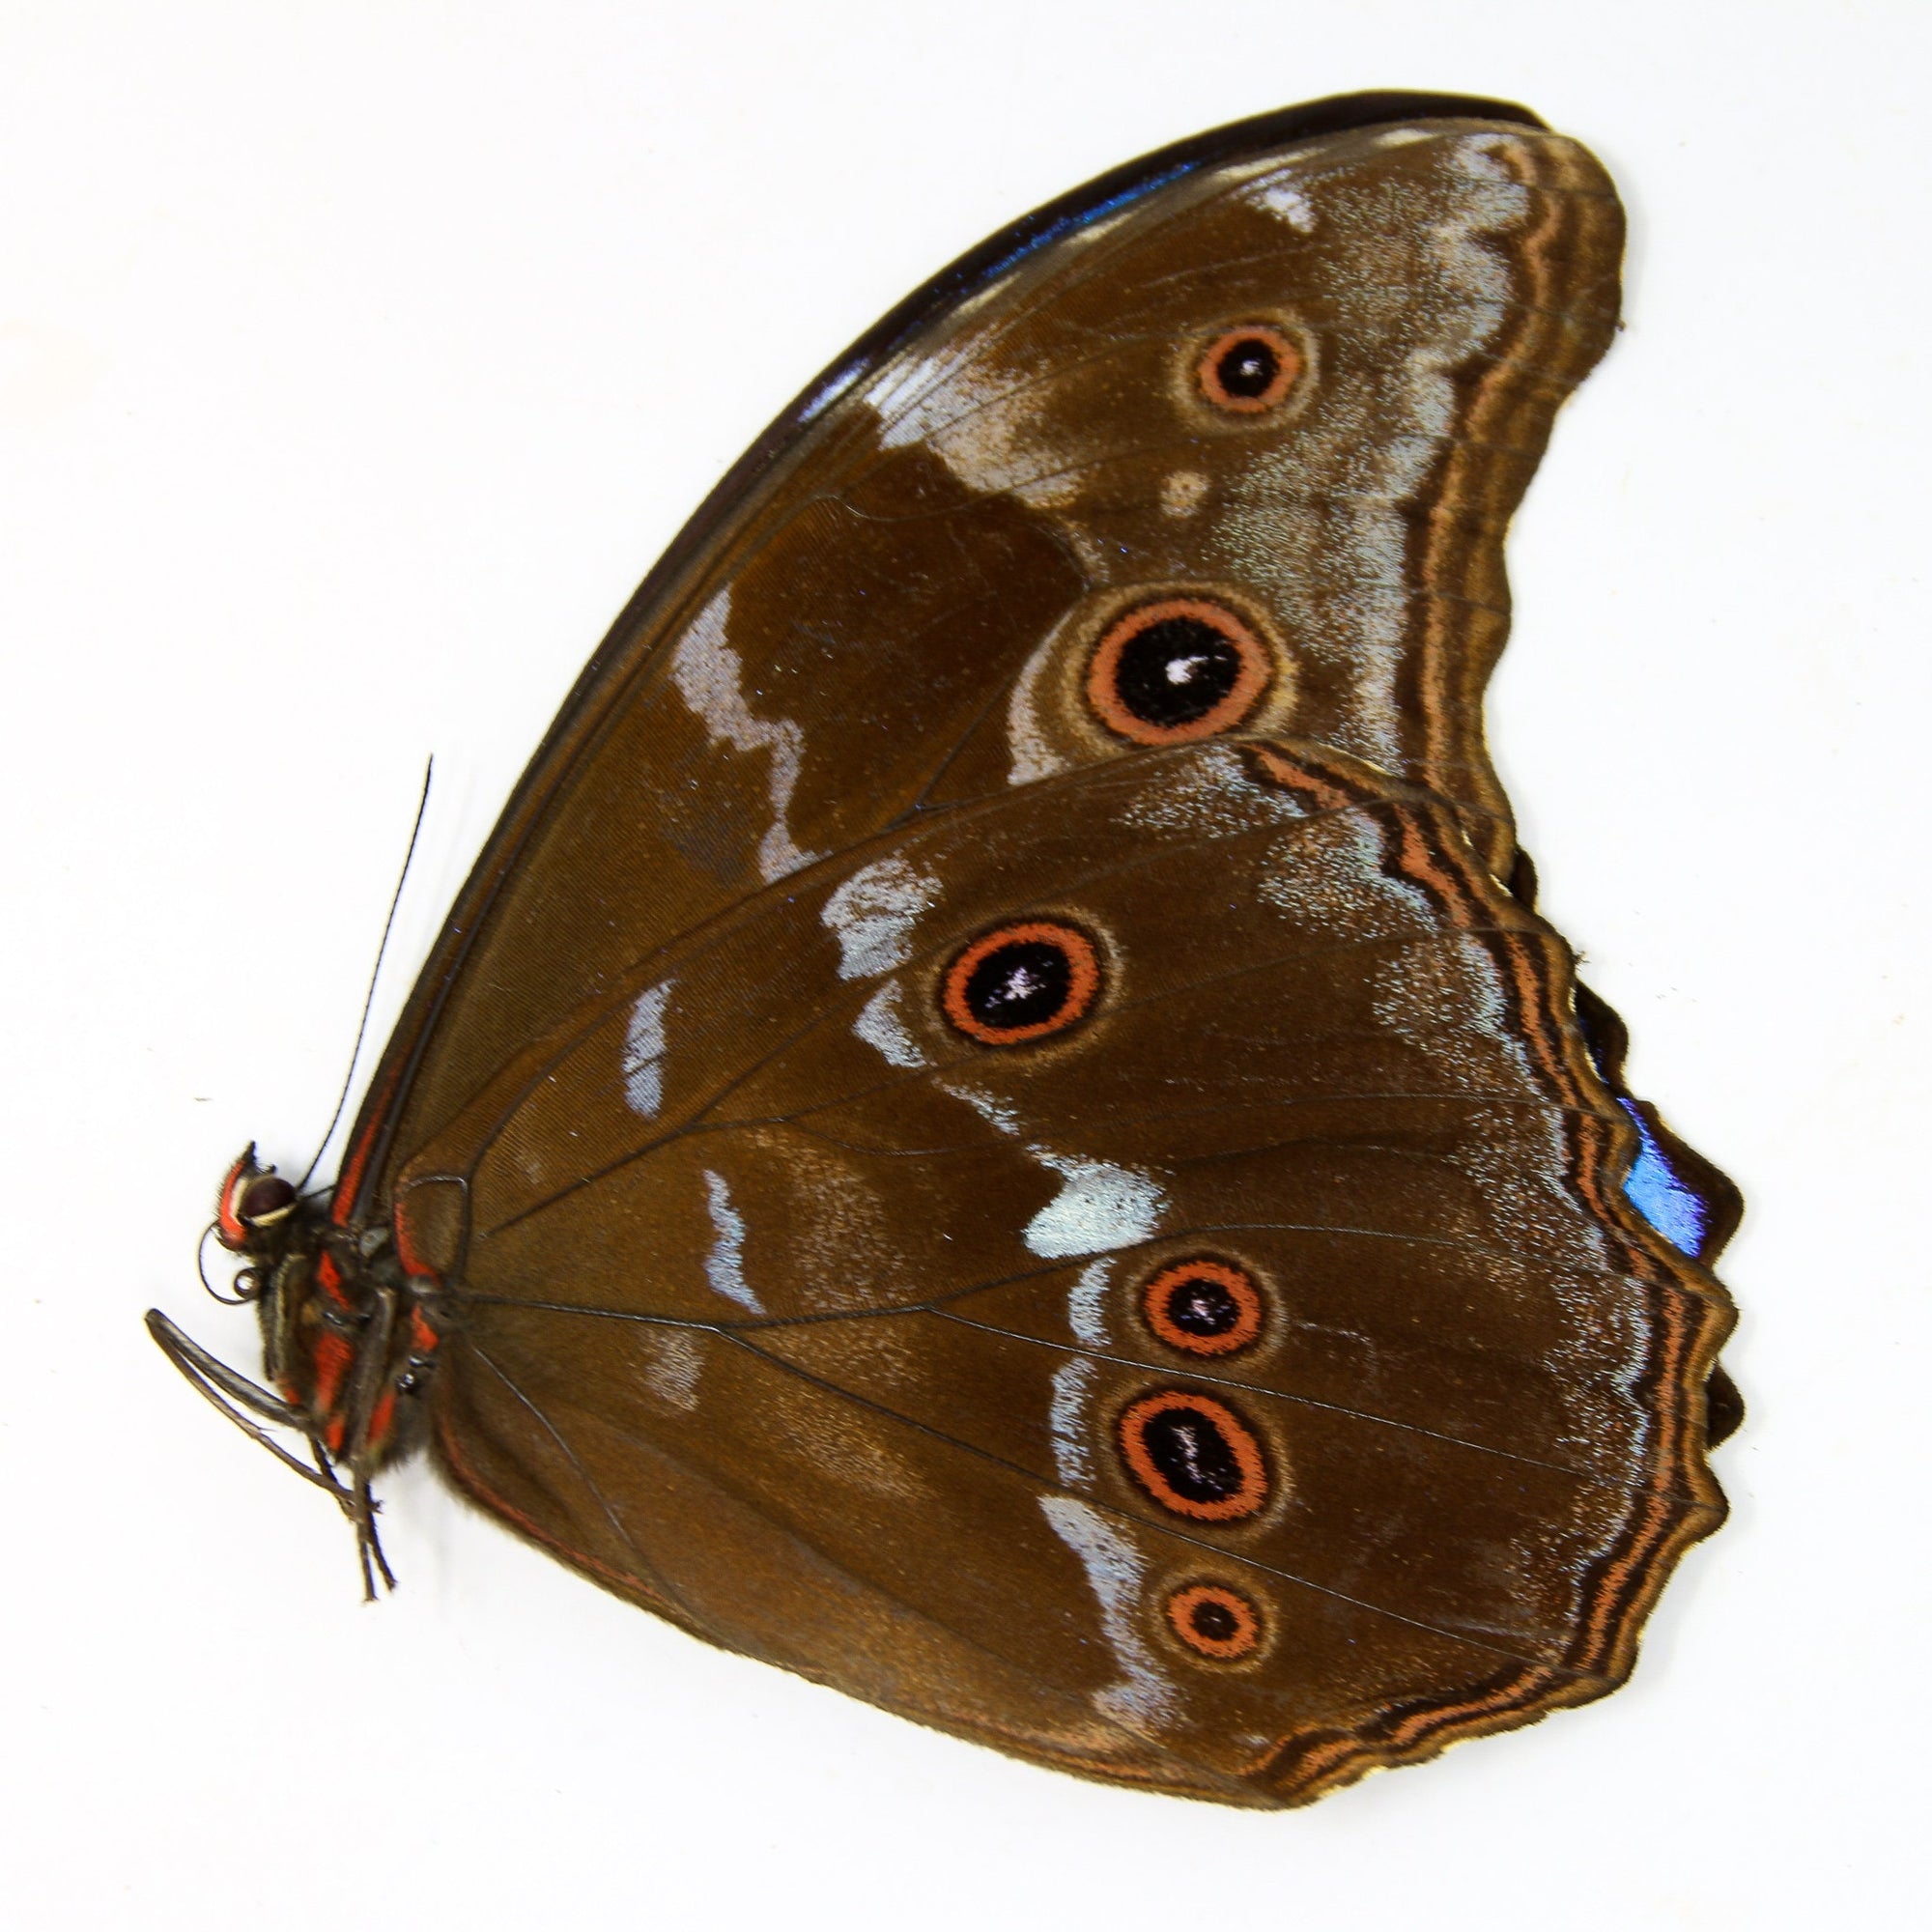 FIVE (5) South American Giant Blue Morpho Butterfly Specimen Taxidermy (Morpho didius) A1 Best Quality